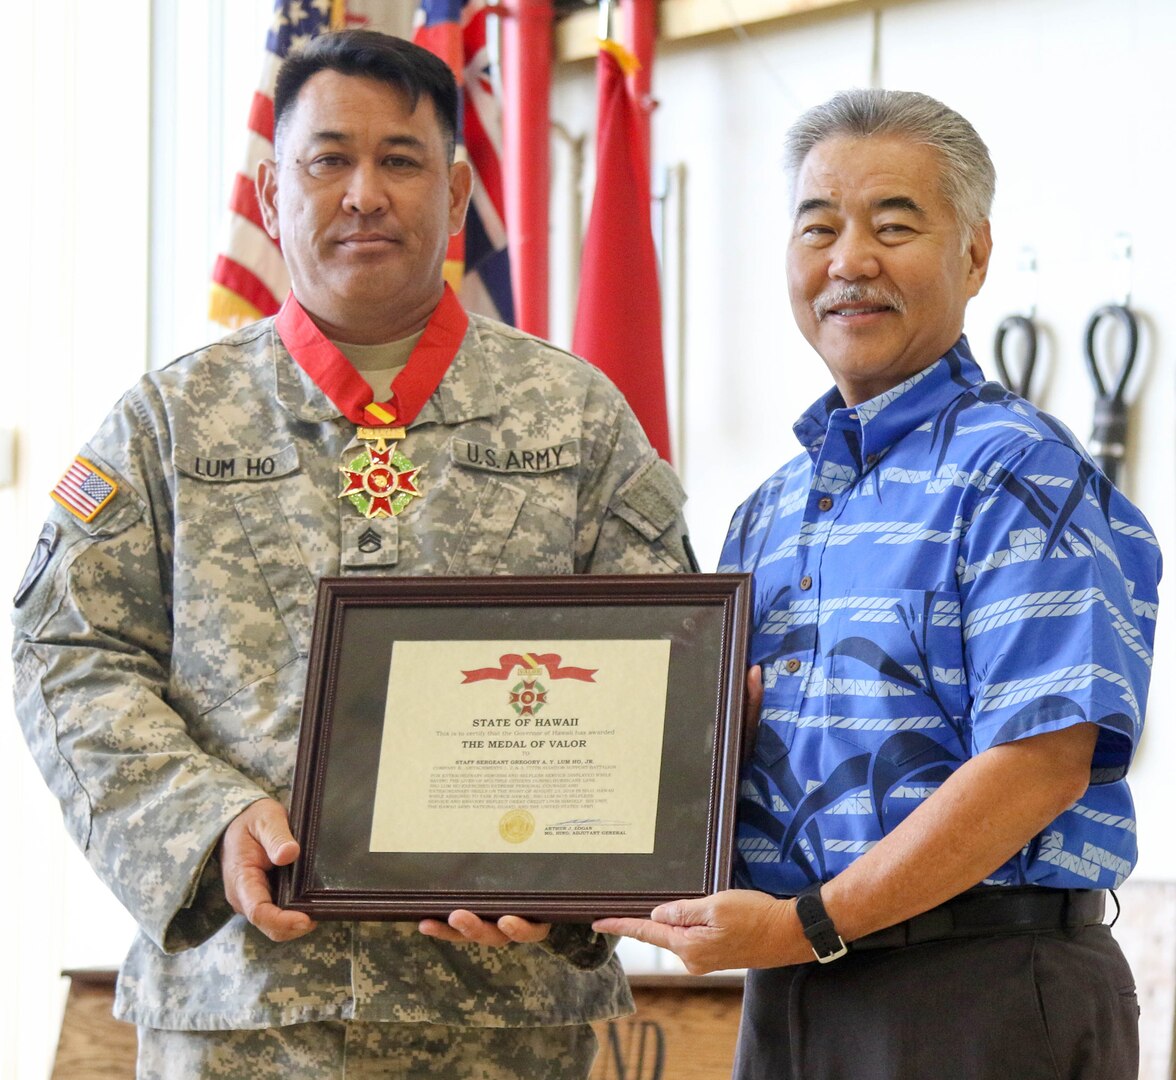 Gov. David Ige presents State Medal of Valor recipient, Staff Sgt. Gregory A.Y. Lum Ho, Jr., with award certificate during  a ceremony held on Feb. 9, 2019, at Wheeler Army Airfield, Hawaii. Lum Ho was awarded the State Medal of Valor for ignoring substantial risk to his own life to ensure the rescue of a family of six while supporting Hawaii National Guard response efforts to Tropical Storm Lane on Aug. 23, 2018,